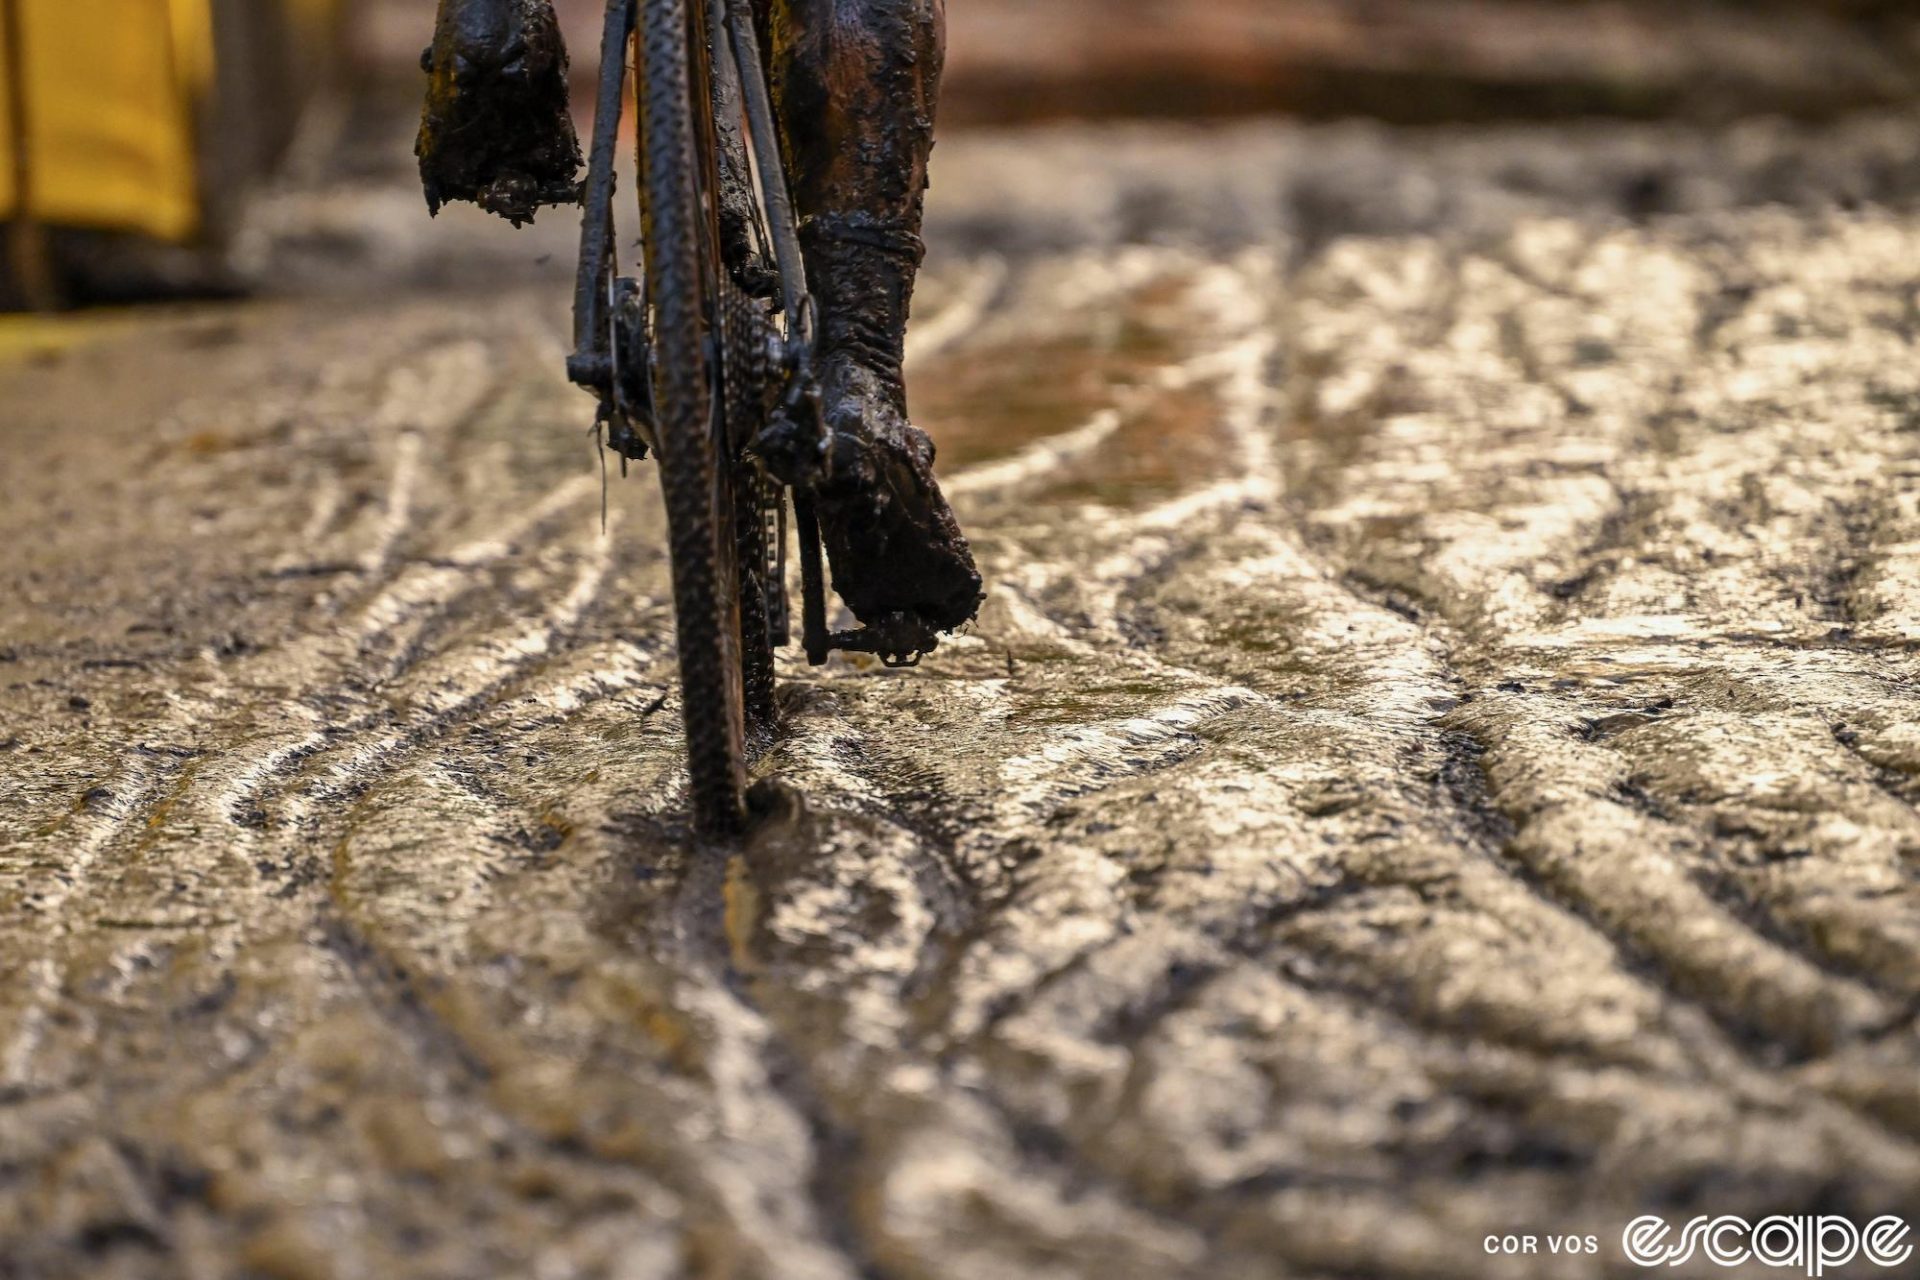 From behind, a rider is seen riding through mud at the Superprestige round at Niel. Only the wheels and feet are visible, covered in mud as the bike traces another track.